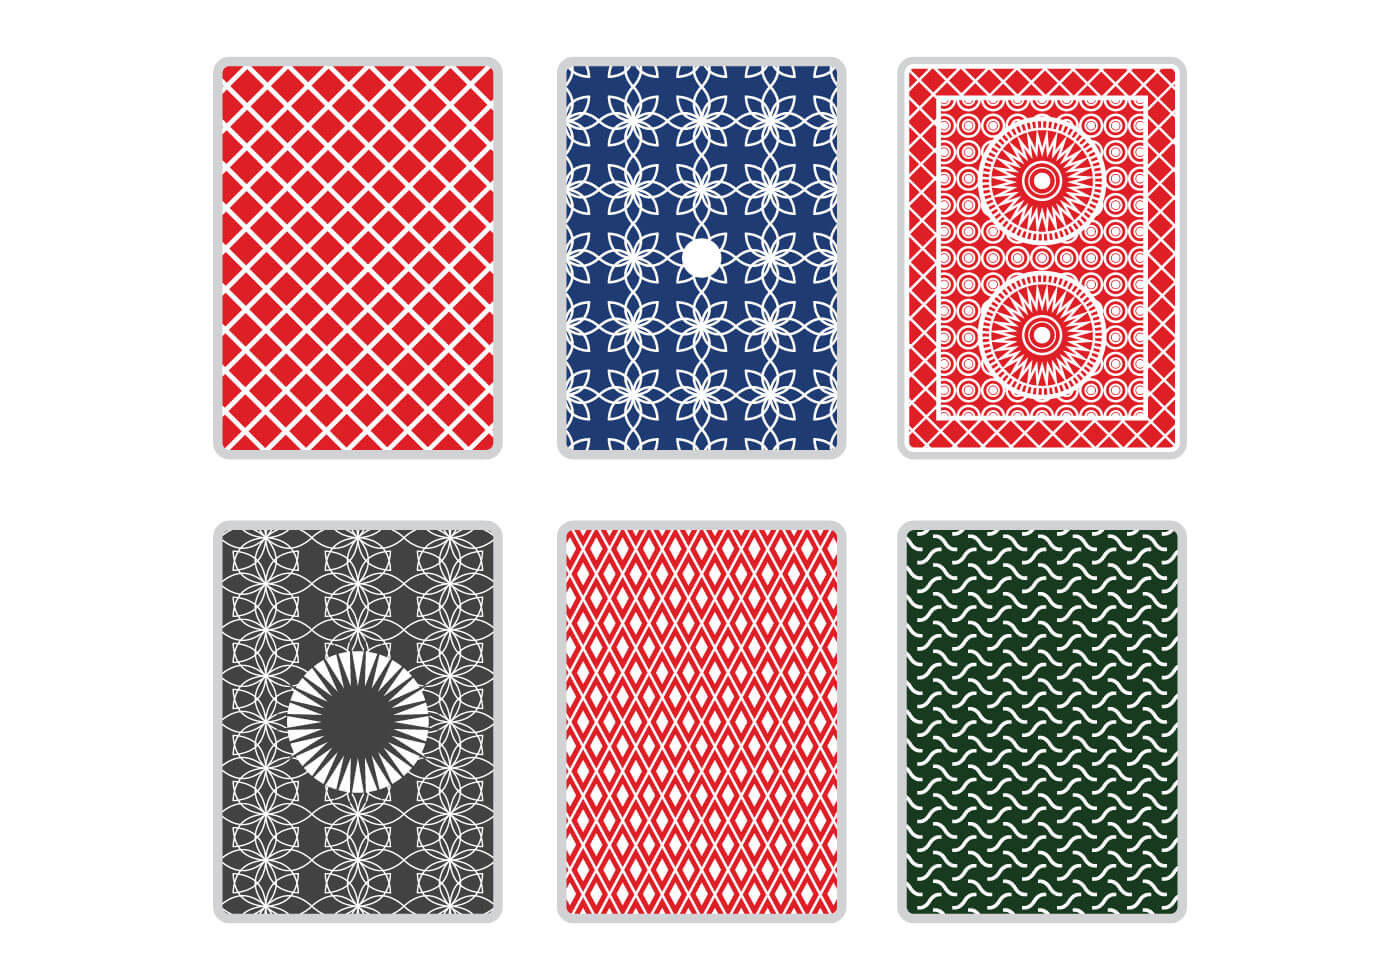 playing-cards-background-free-vector-art-881-free-downloads-within